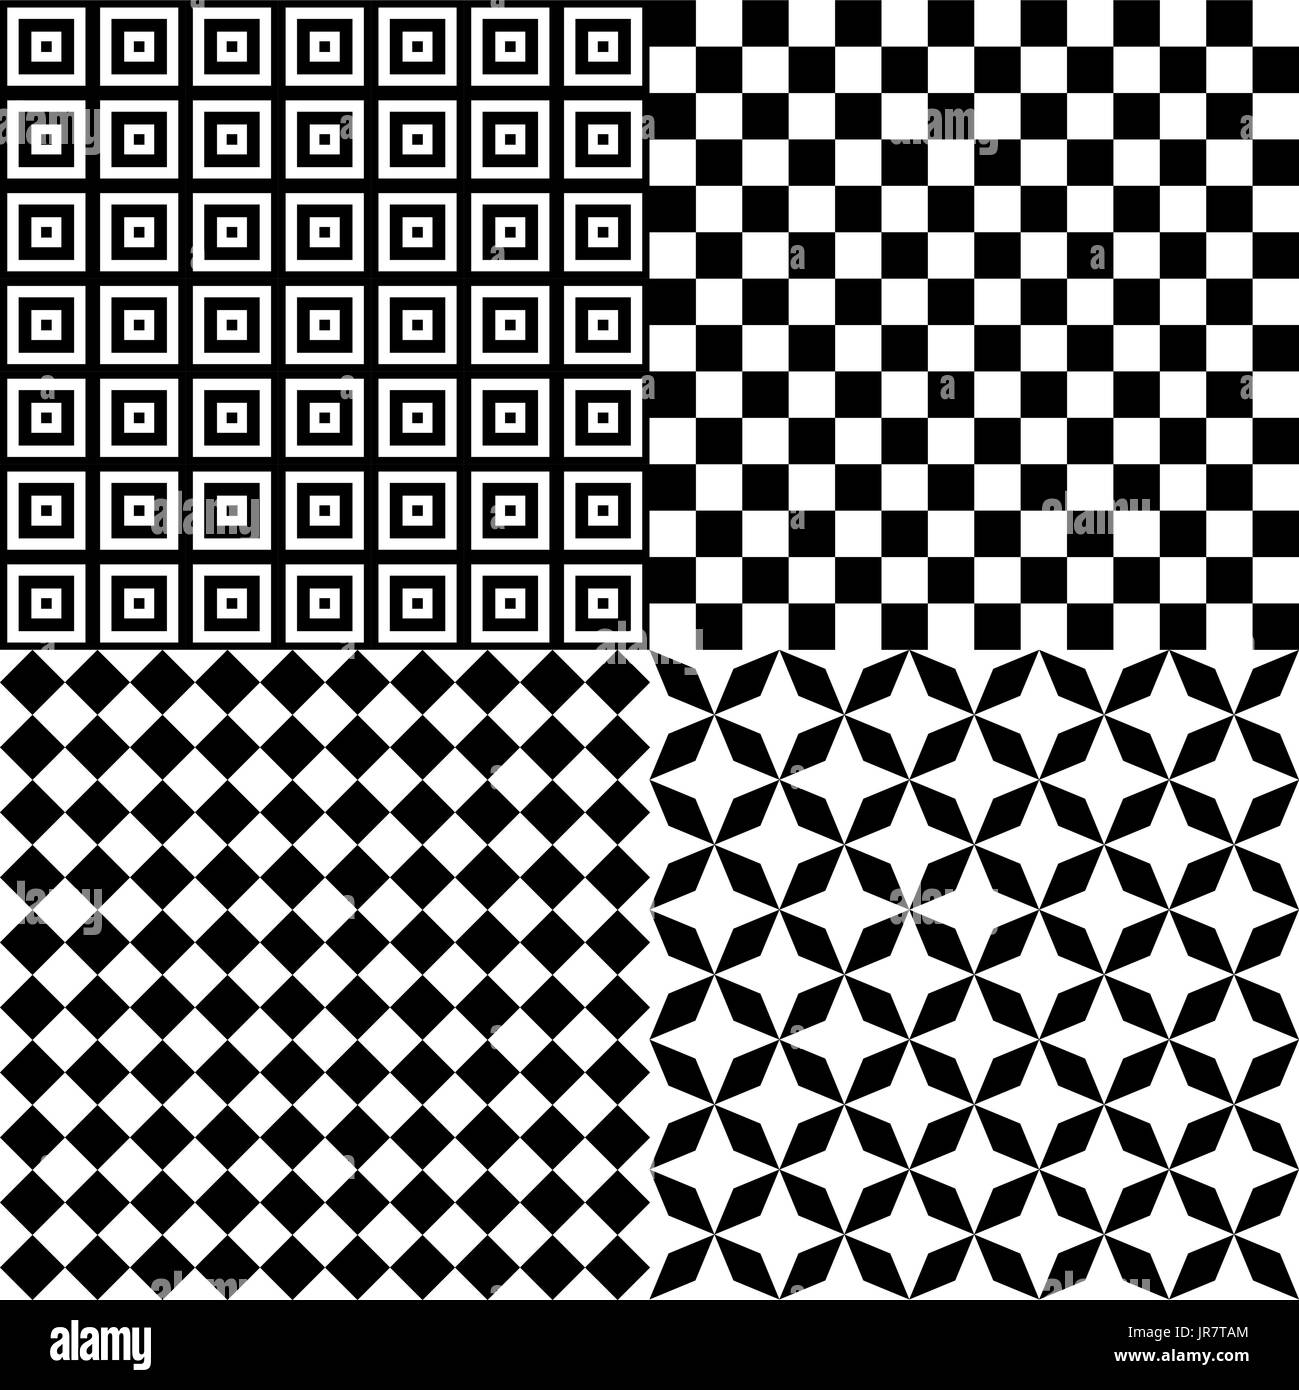 Black and White Hypnotic Psychedelic Background Collection Set Pattern. Vector Illustration Stock Vector